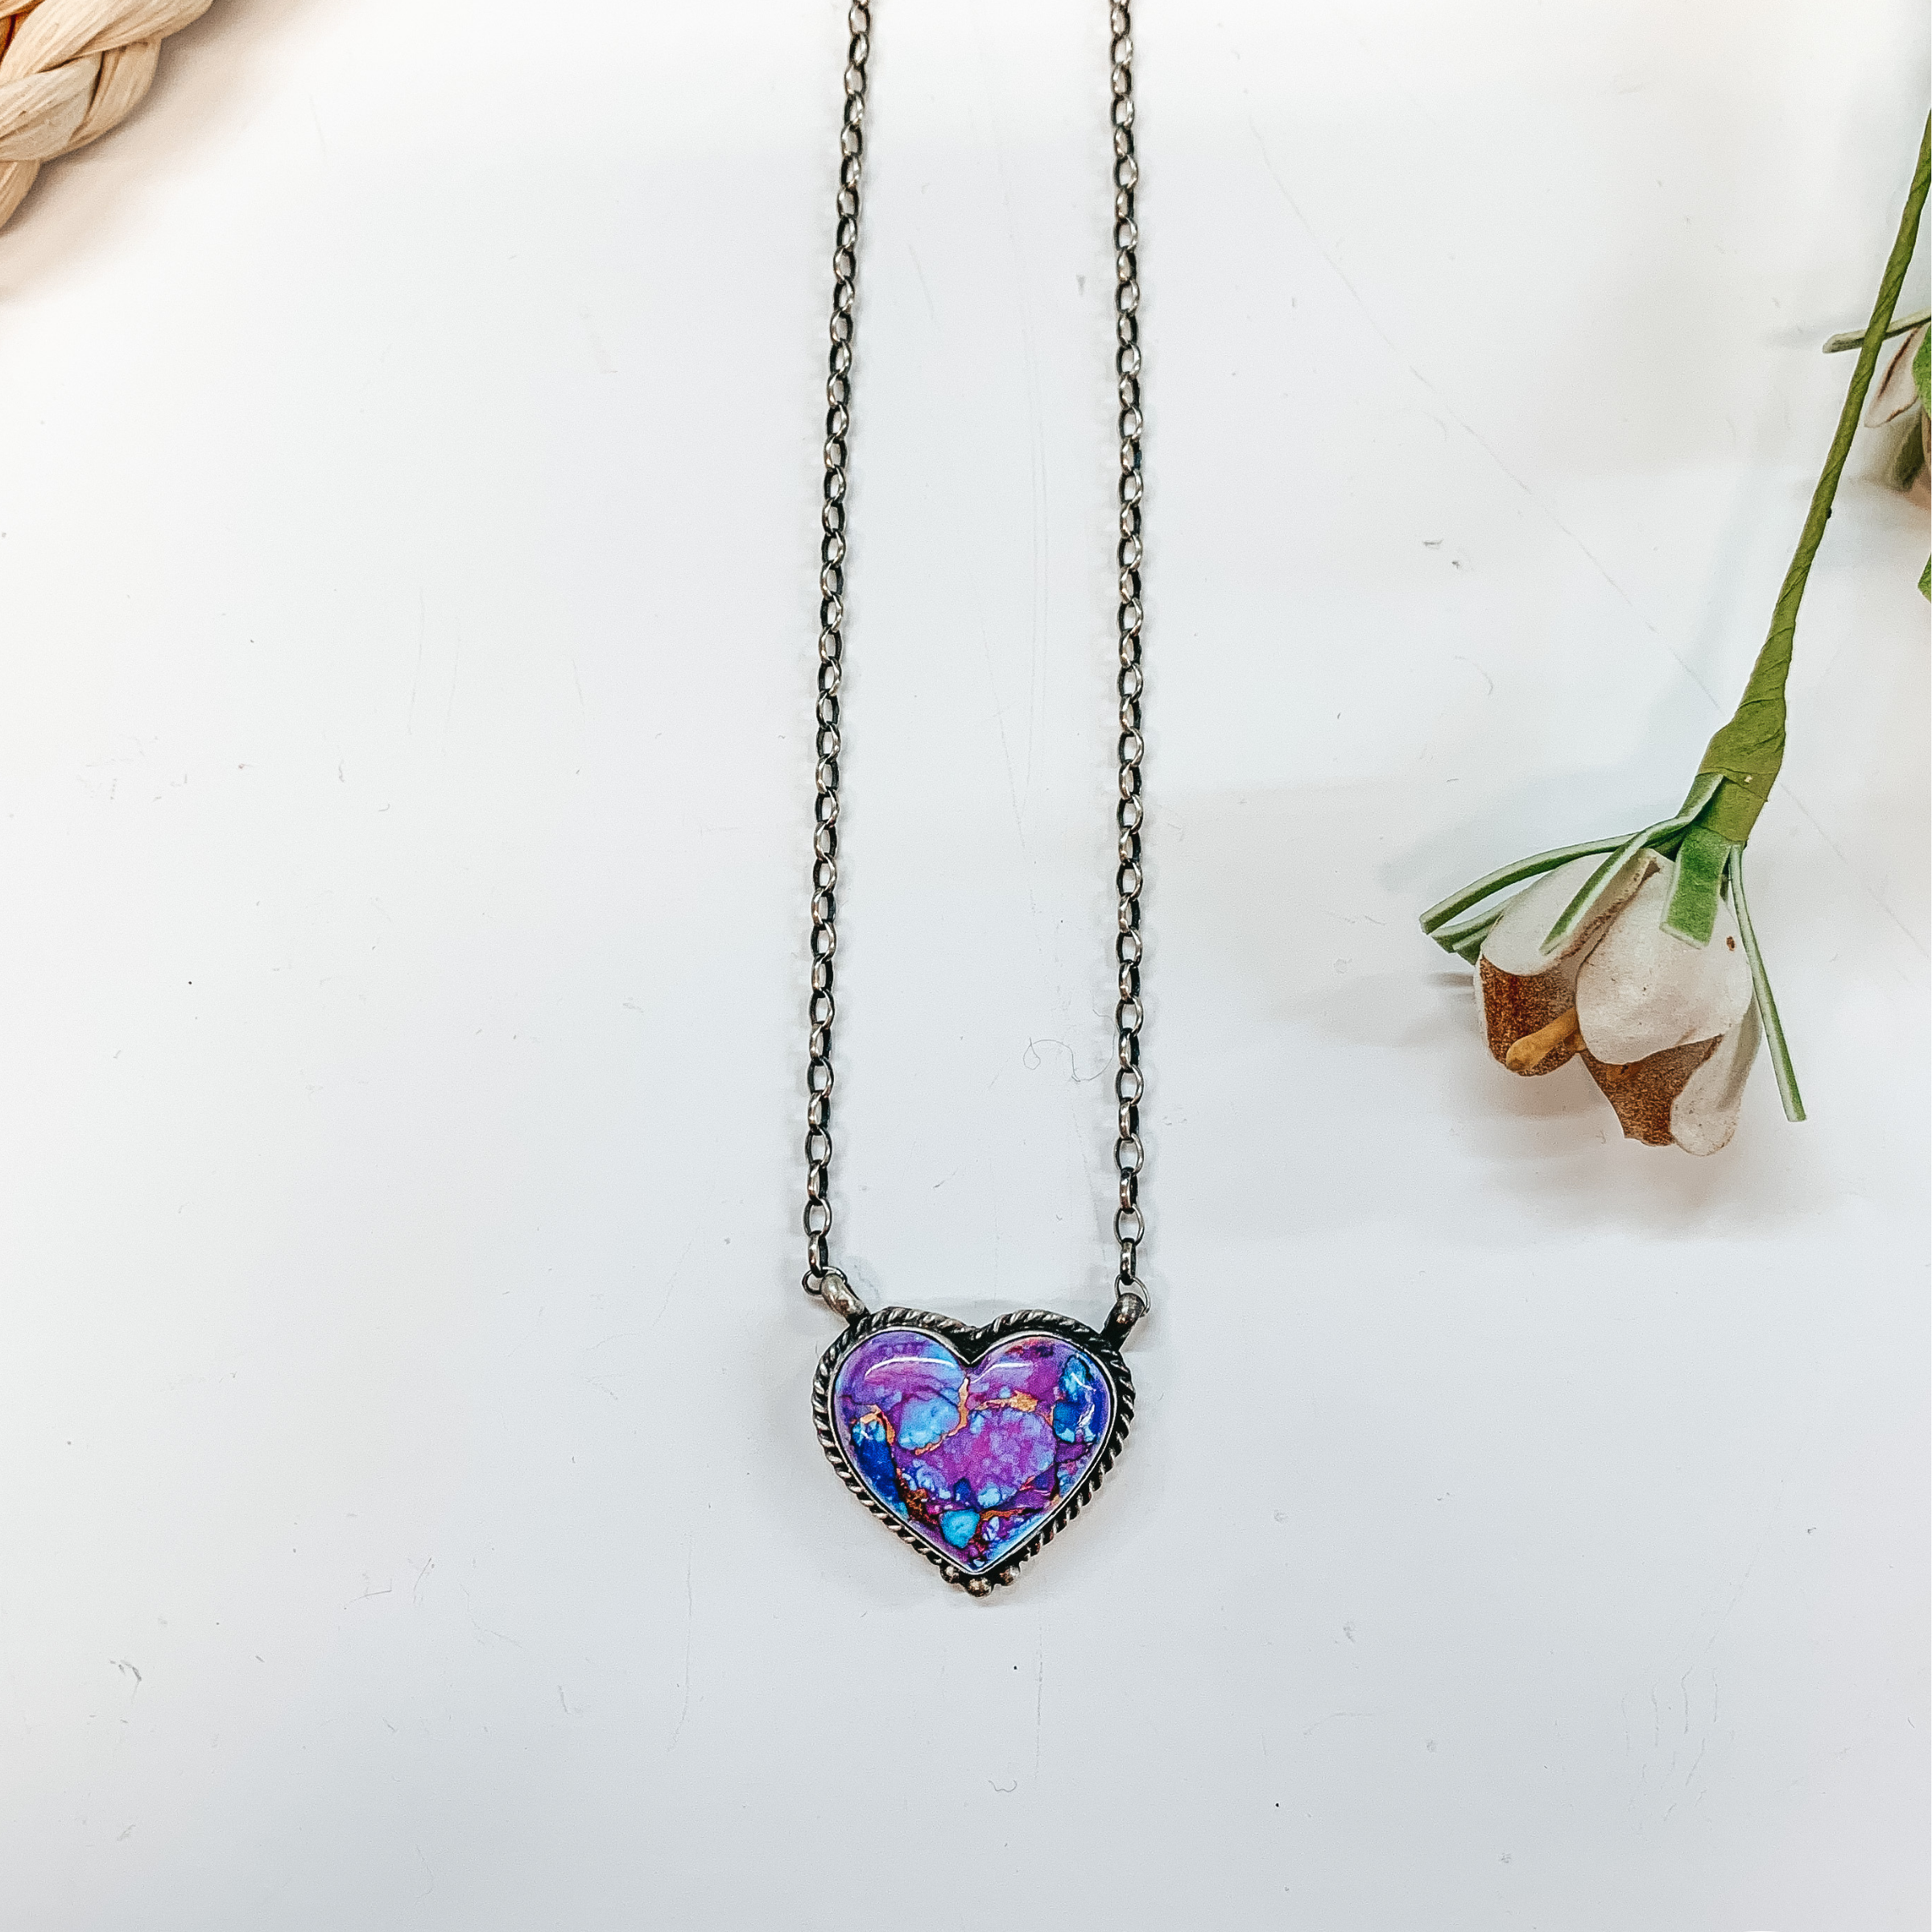 Vernon Kee | Navajo Handmade Adjustable Sterling Silver Chain Necklace with Remix Mojave Turquoise Stone and Rope Detailing Heart - Giddy Up Glamour Boutique